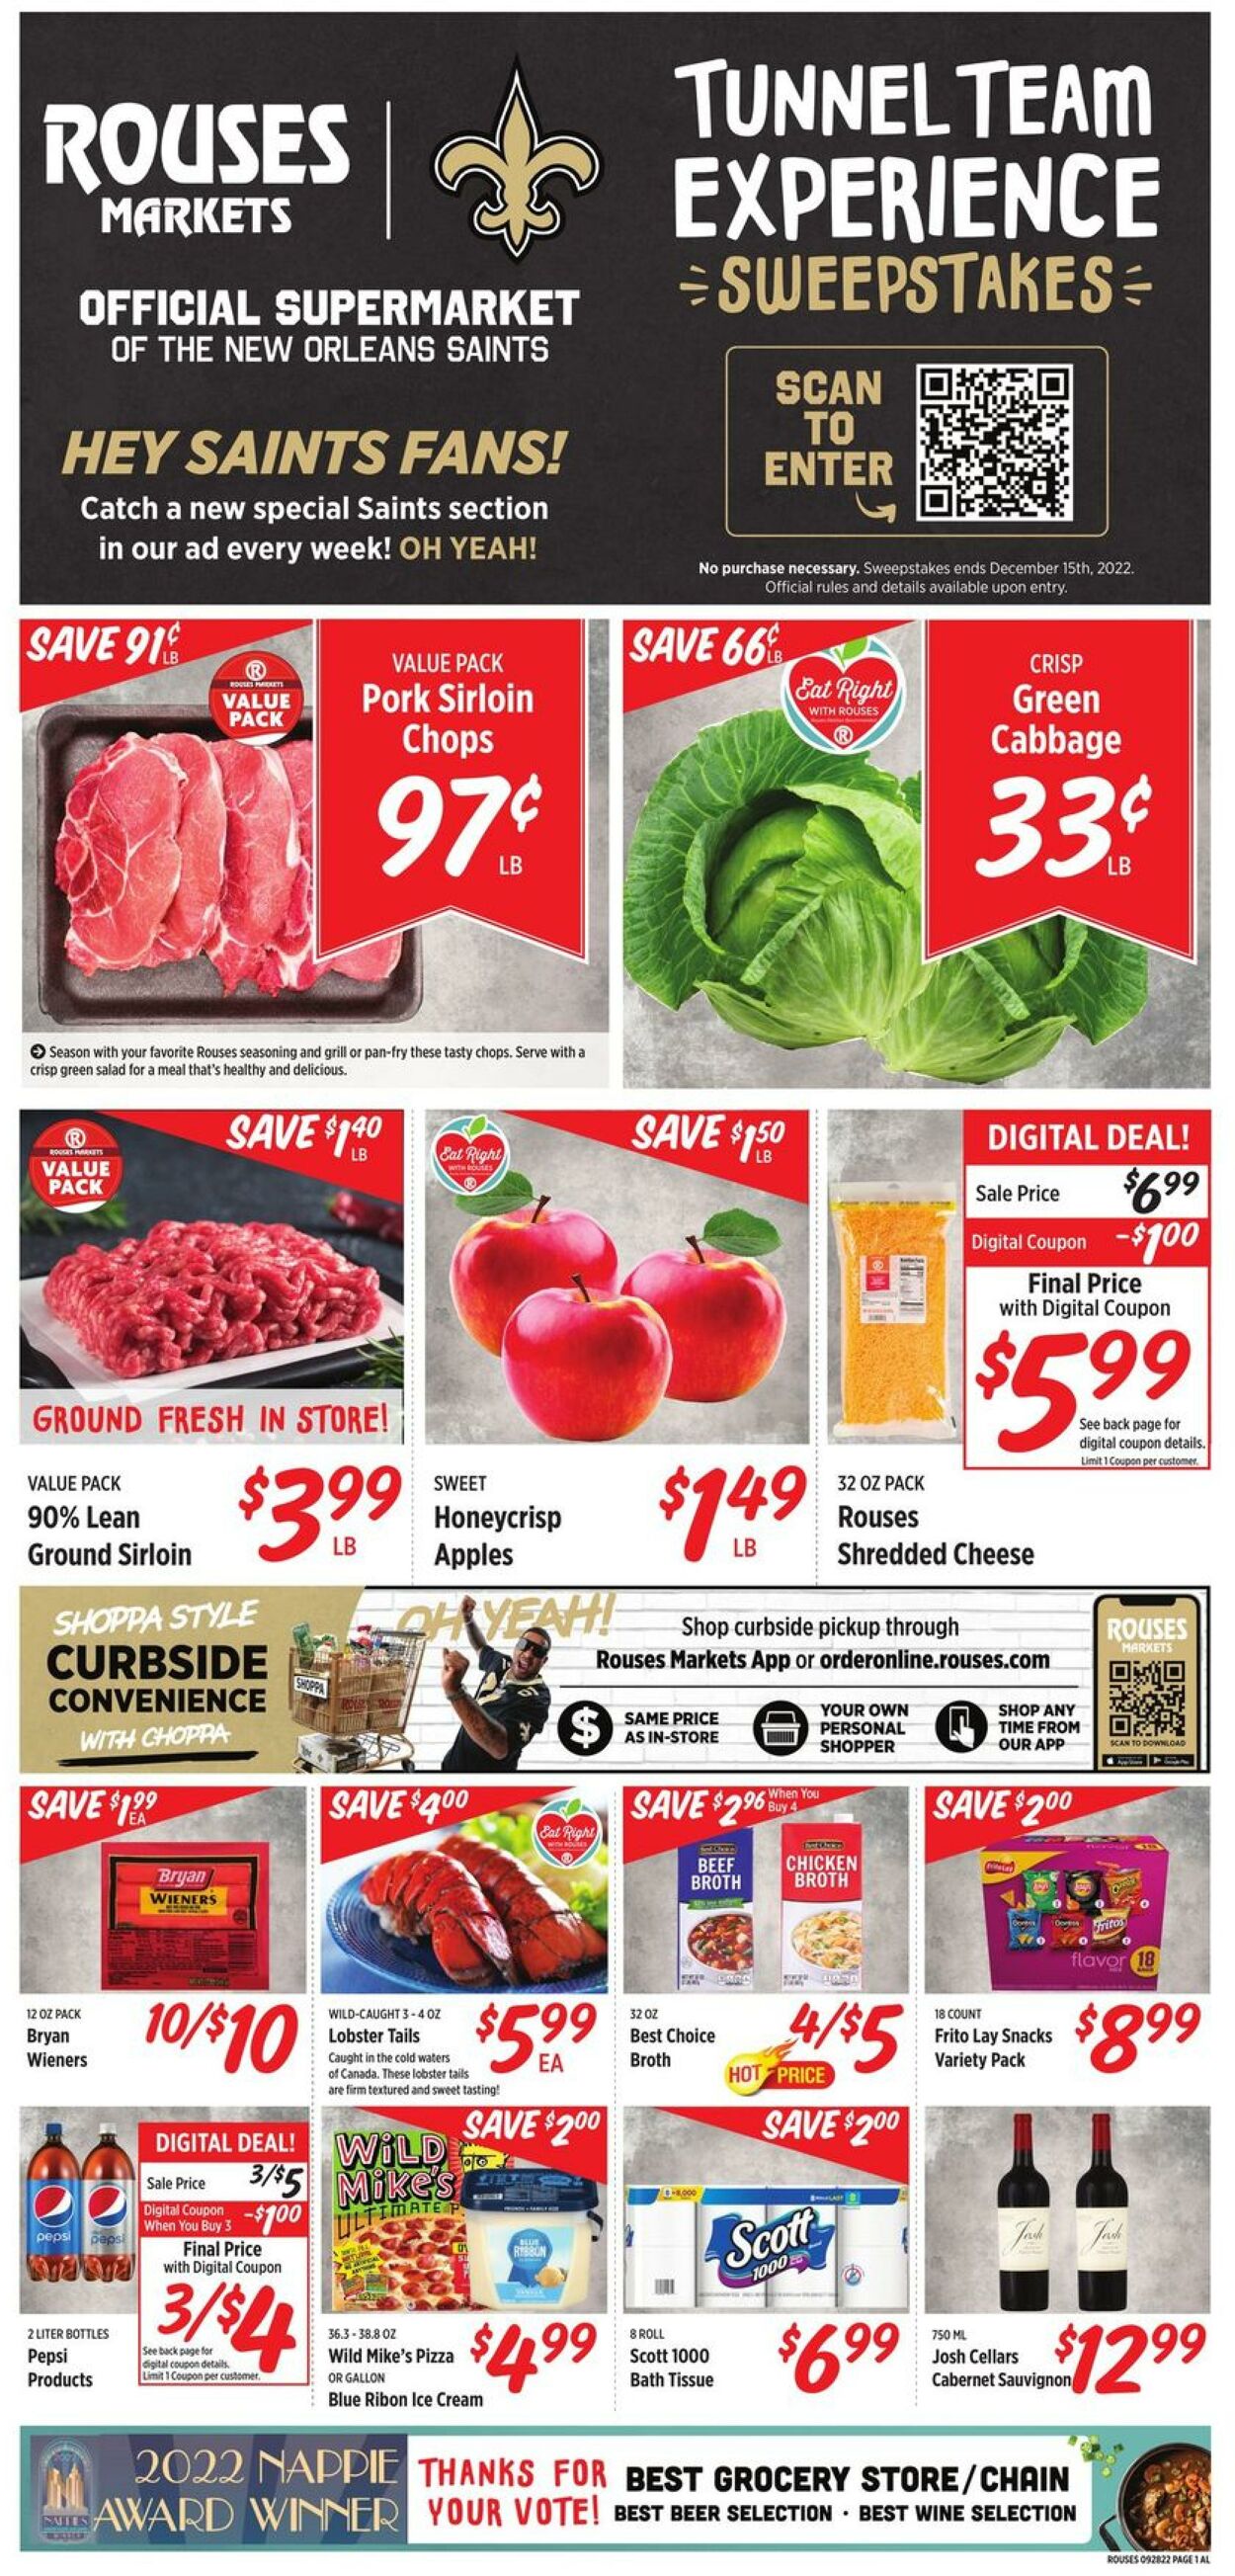 Rouses Promotional weekly ads